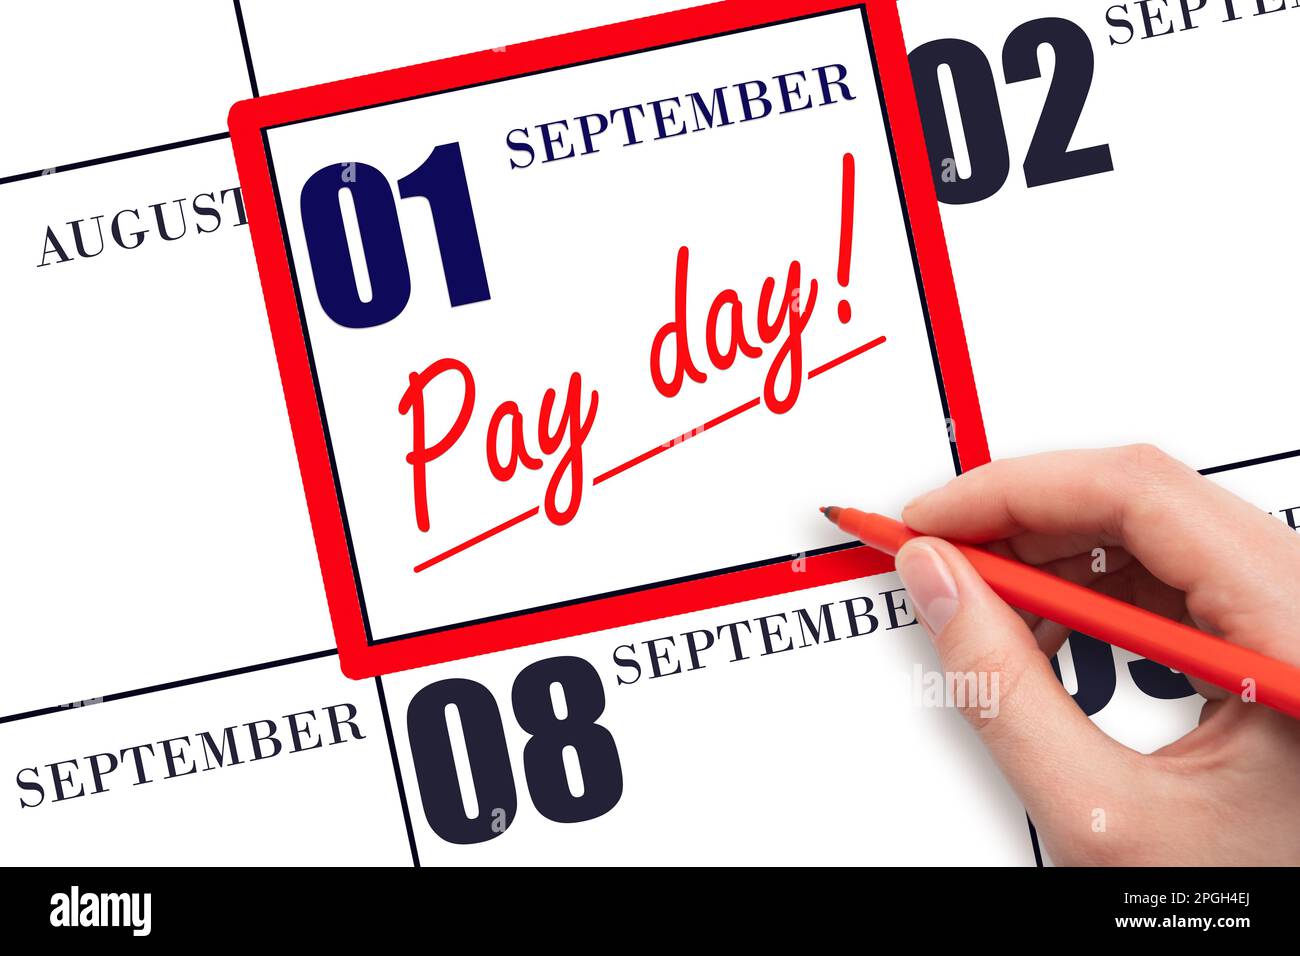 1st day of September. Hand writing text PAY DATE on calendar date September 1 and underline it. Payment due date. Reminder concept of payment. Autumn Stock Photo